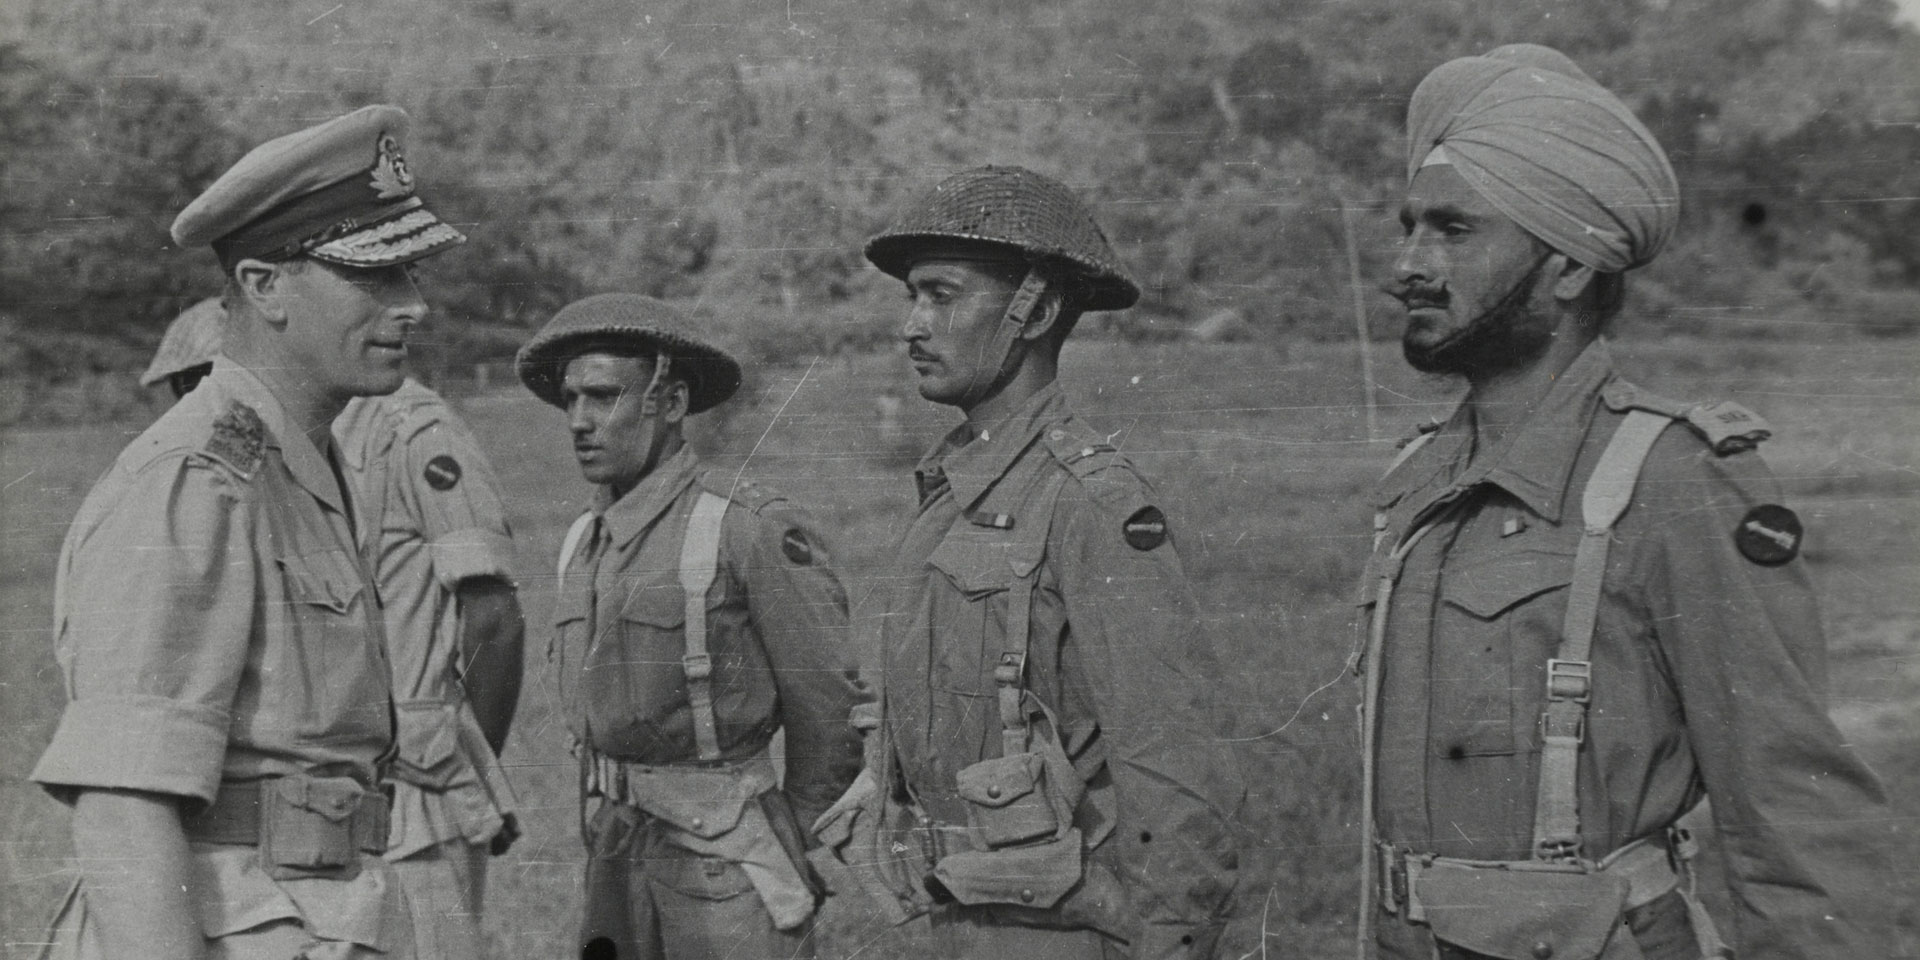 Photograph of Mountbatten talking to Indian soldiers, 1945